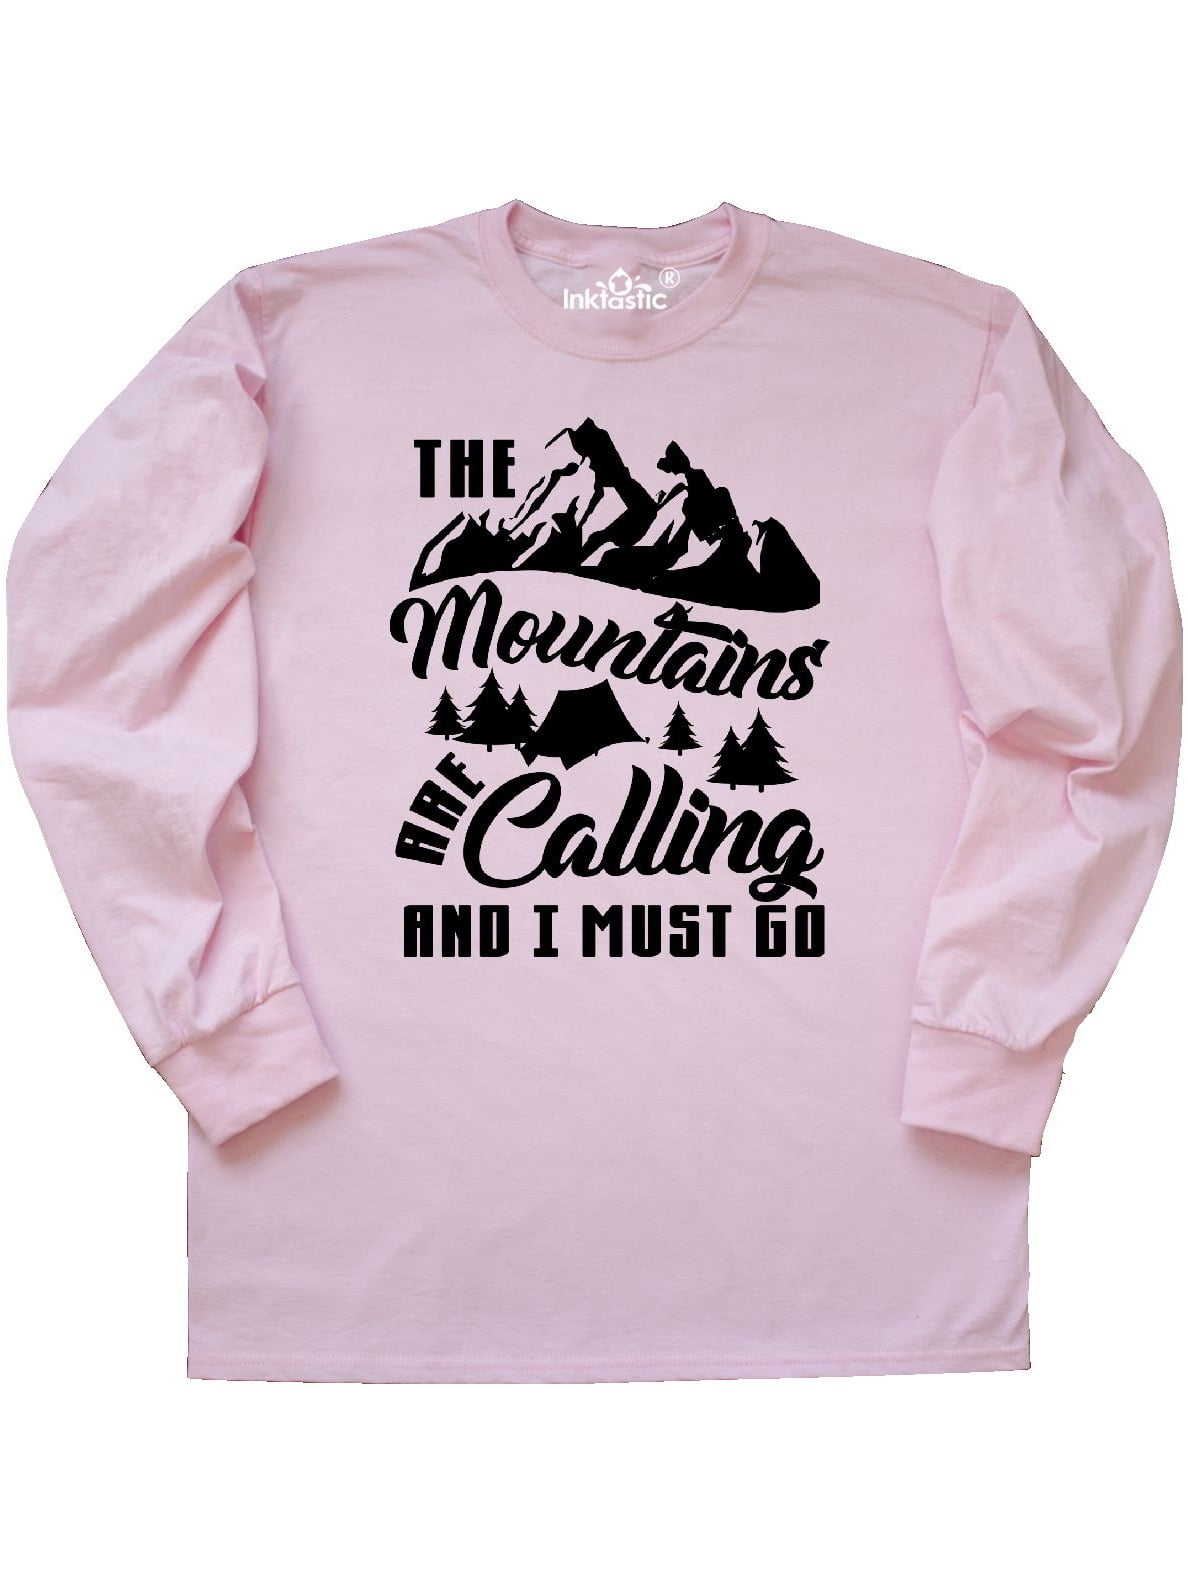 Adult The Mountains are Calling and I Must Go Sweatshirt Crewneck